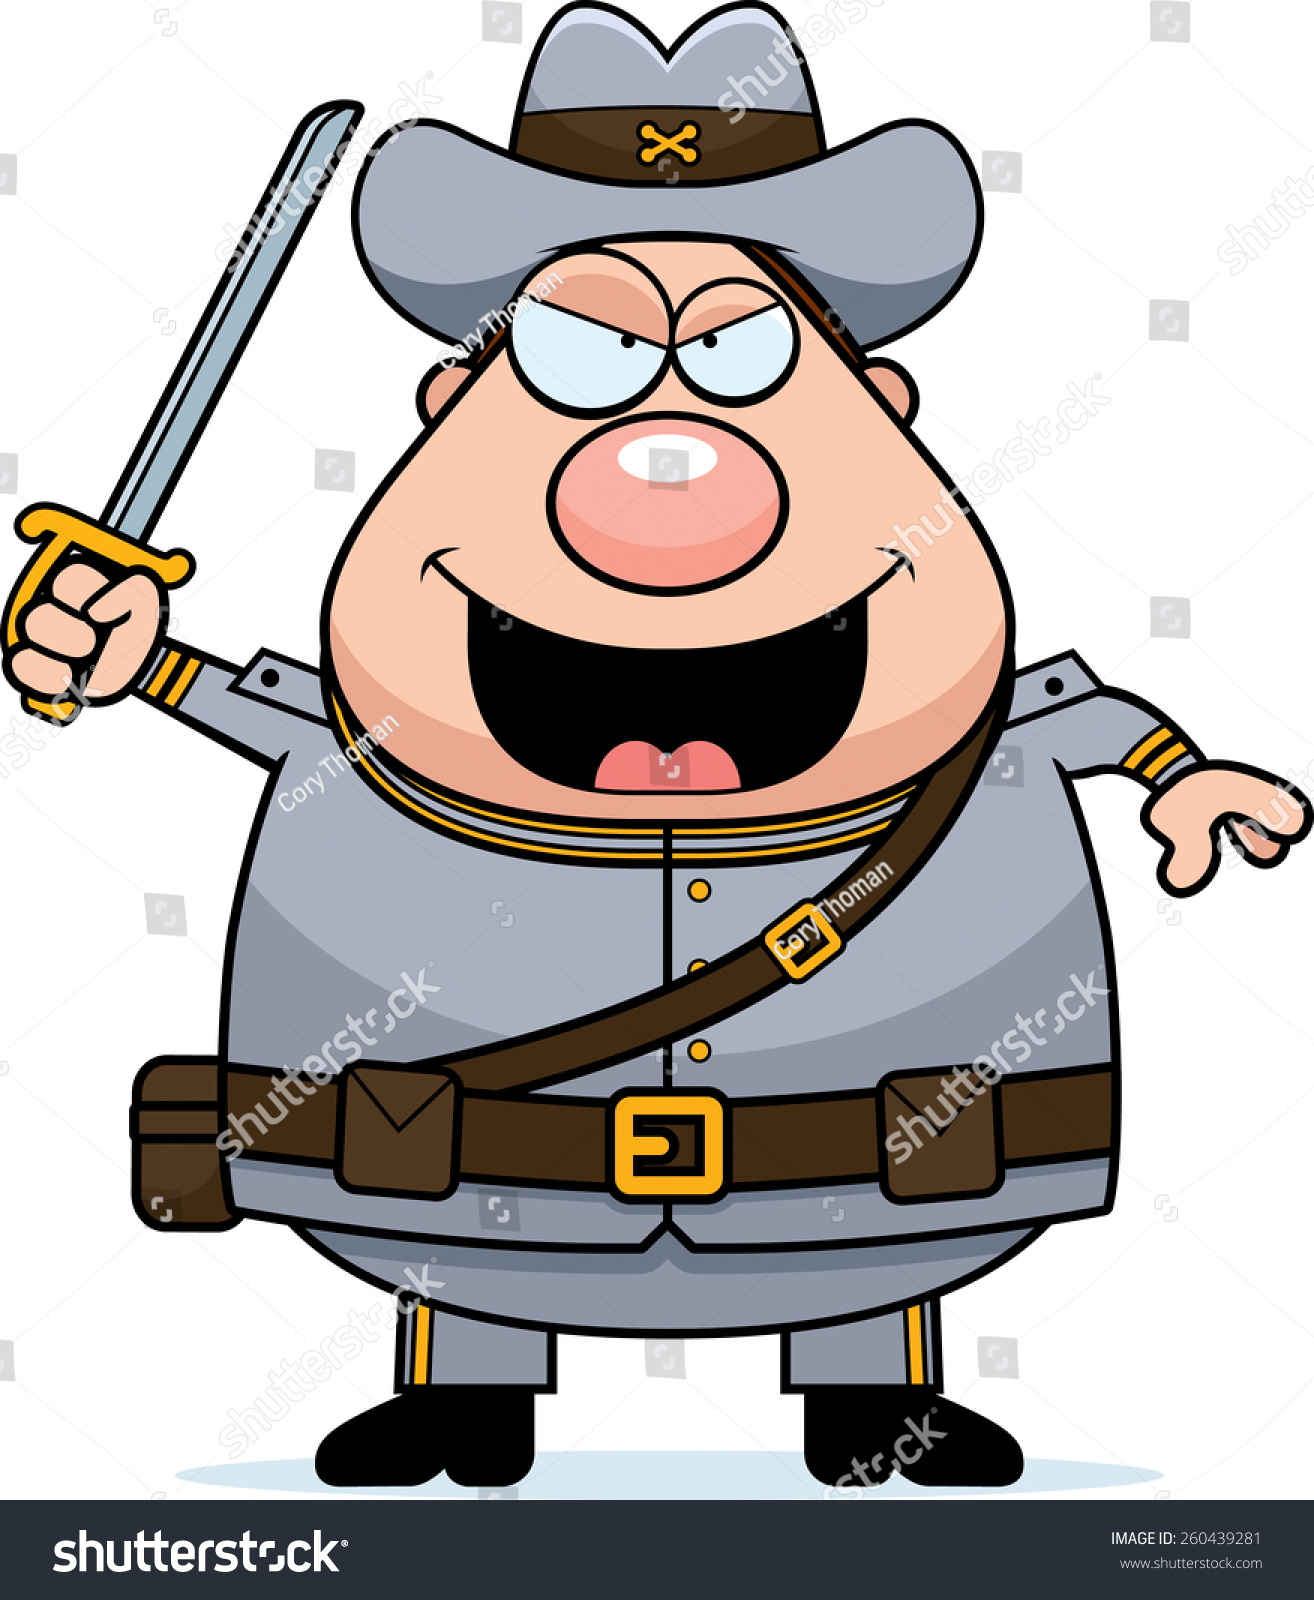 SVG of A cartoon illustration of a Civil War Confederate soldier looking angry. svg